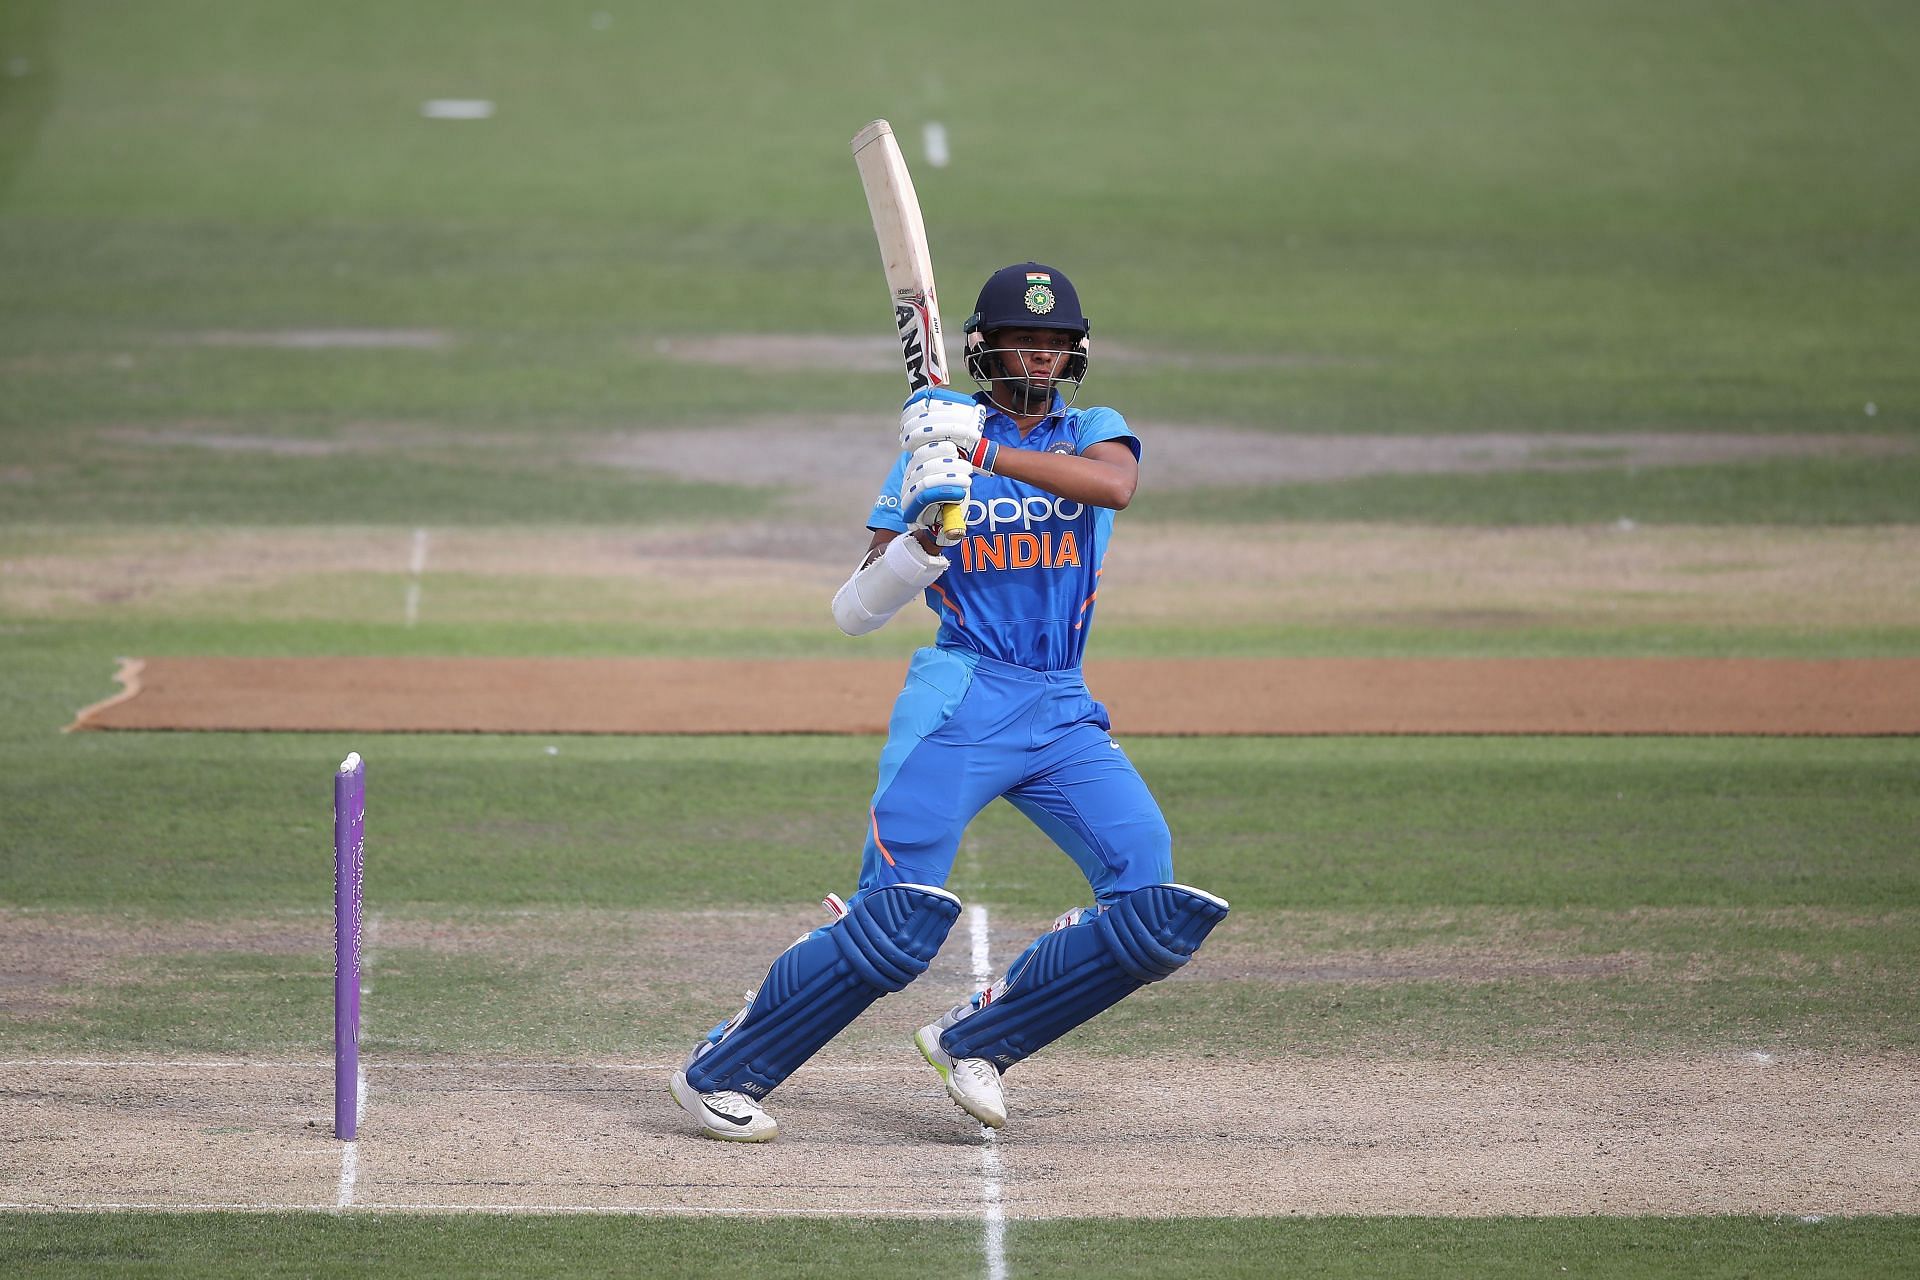 Yashasvi Jaiswal has a better record in first-class cricket compared to Ruturaj Gaikwad